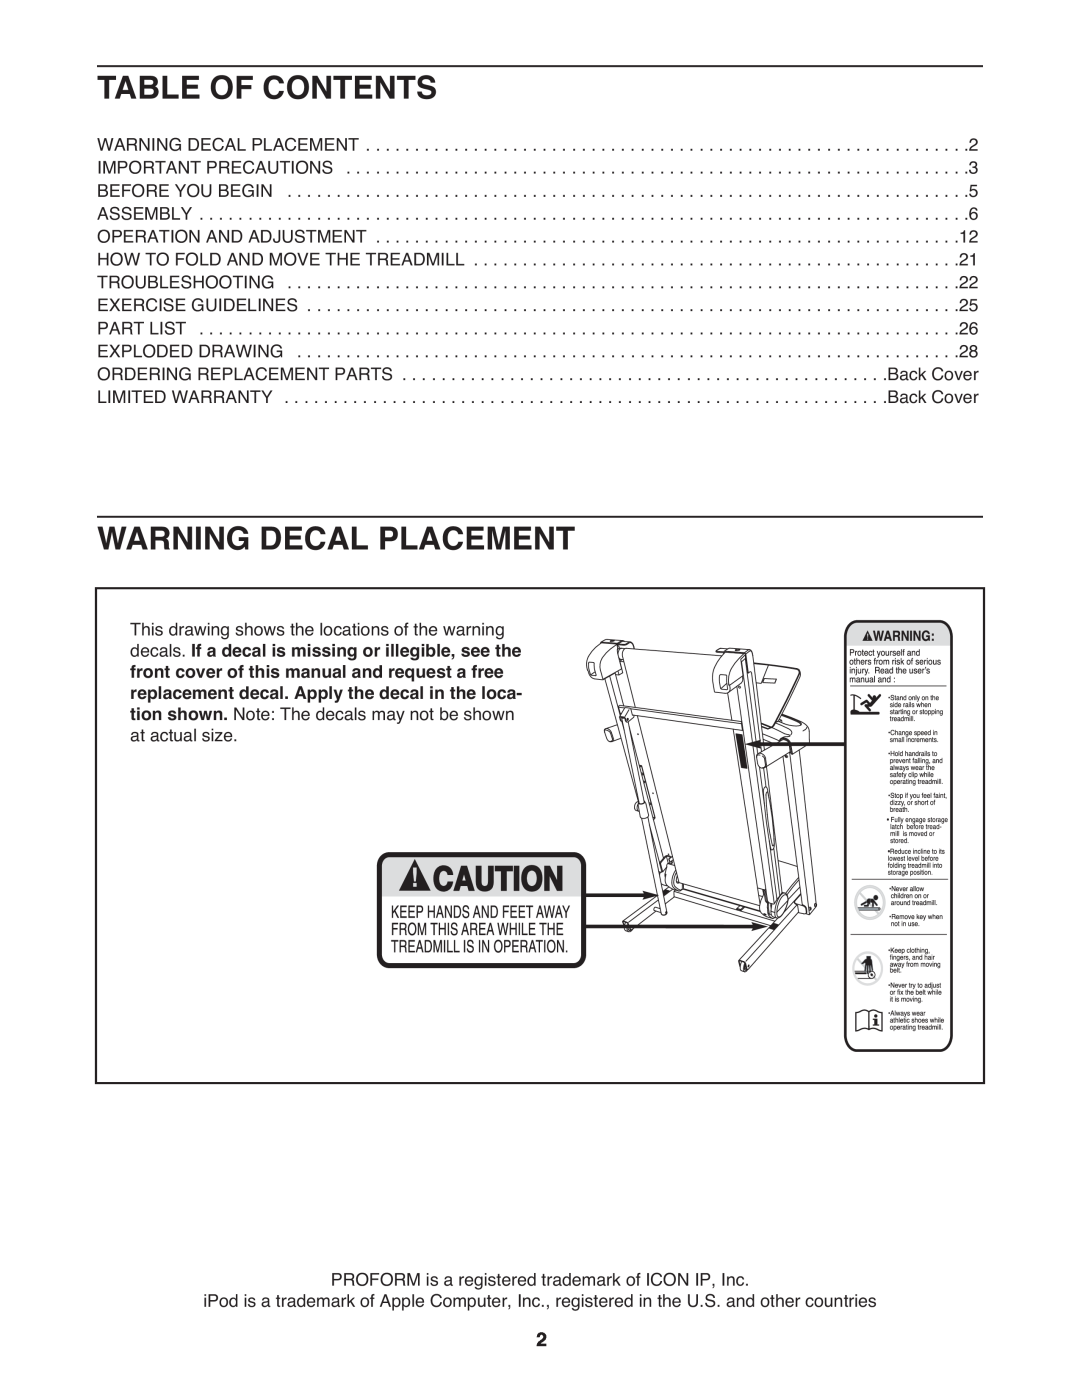 ProForm PFTL06009.0 user manual Table Of Contents, Warning Decal Placement 